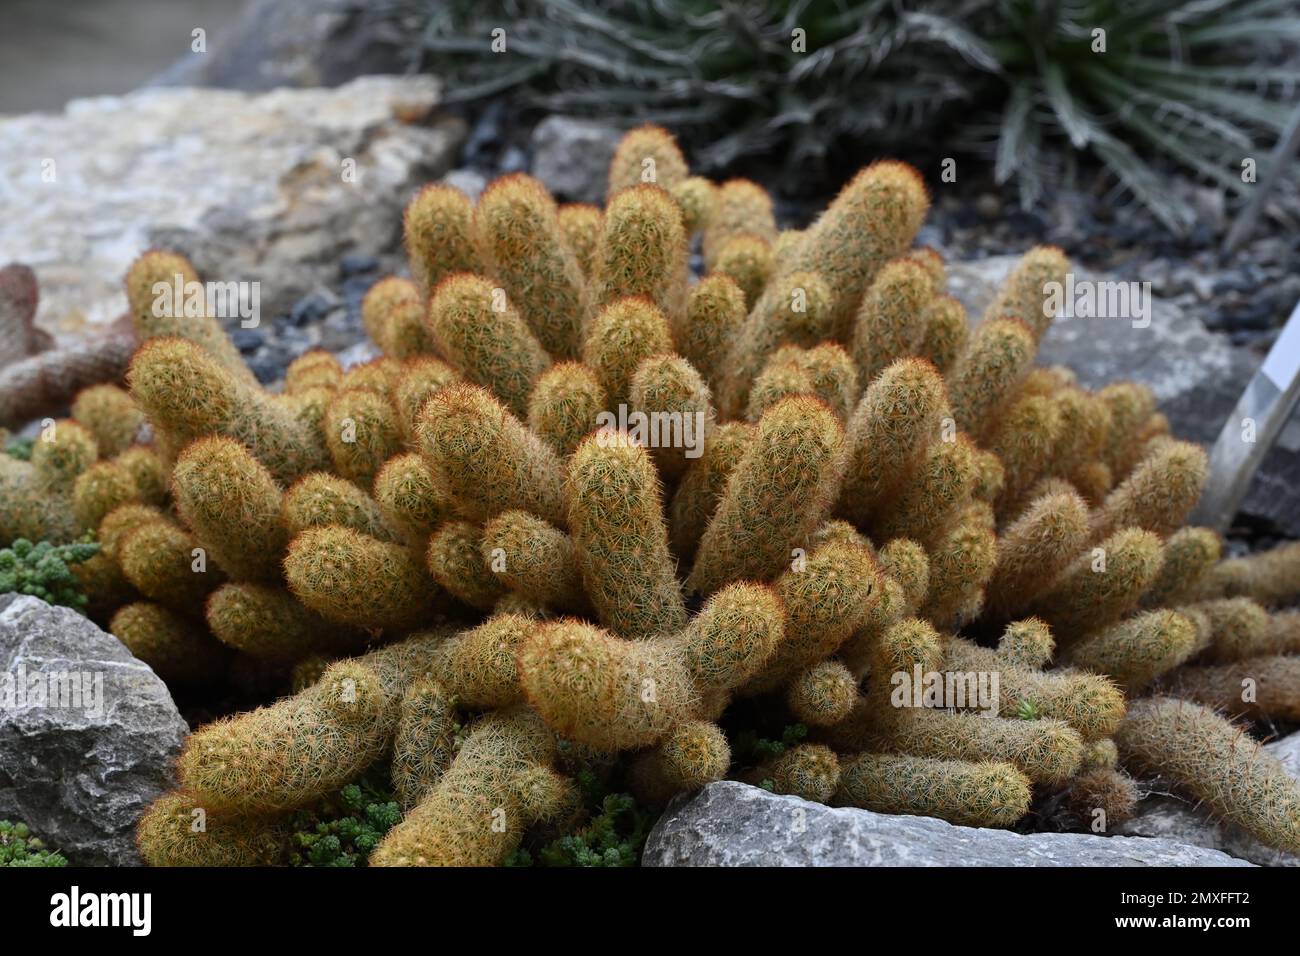 Cactus called in Latin Mammillaria elongata growing in densely packed clusters of elongated oval stems. Stock Photo